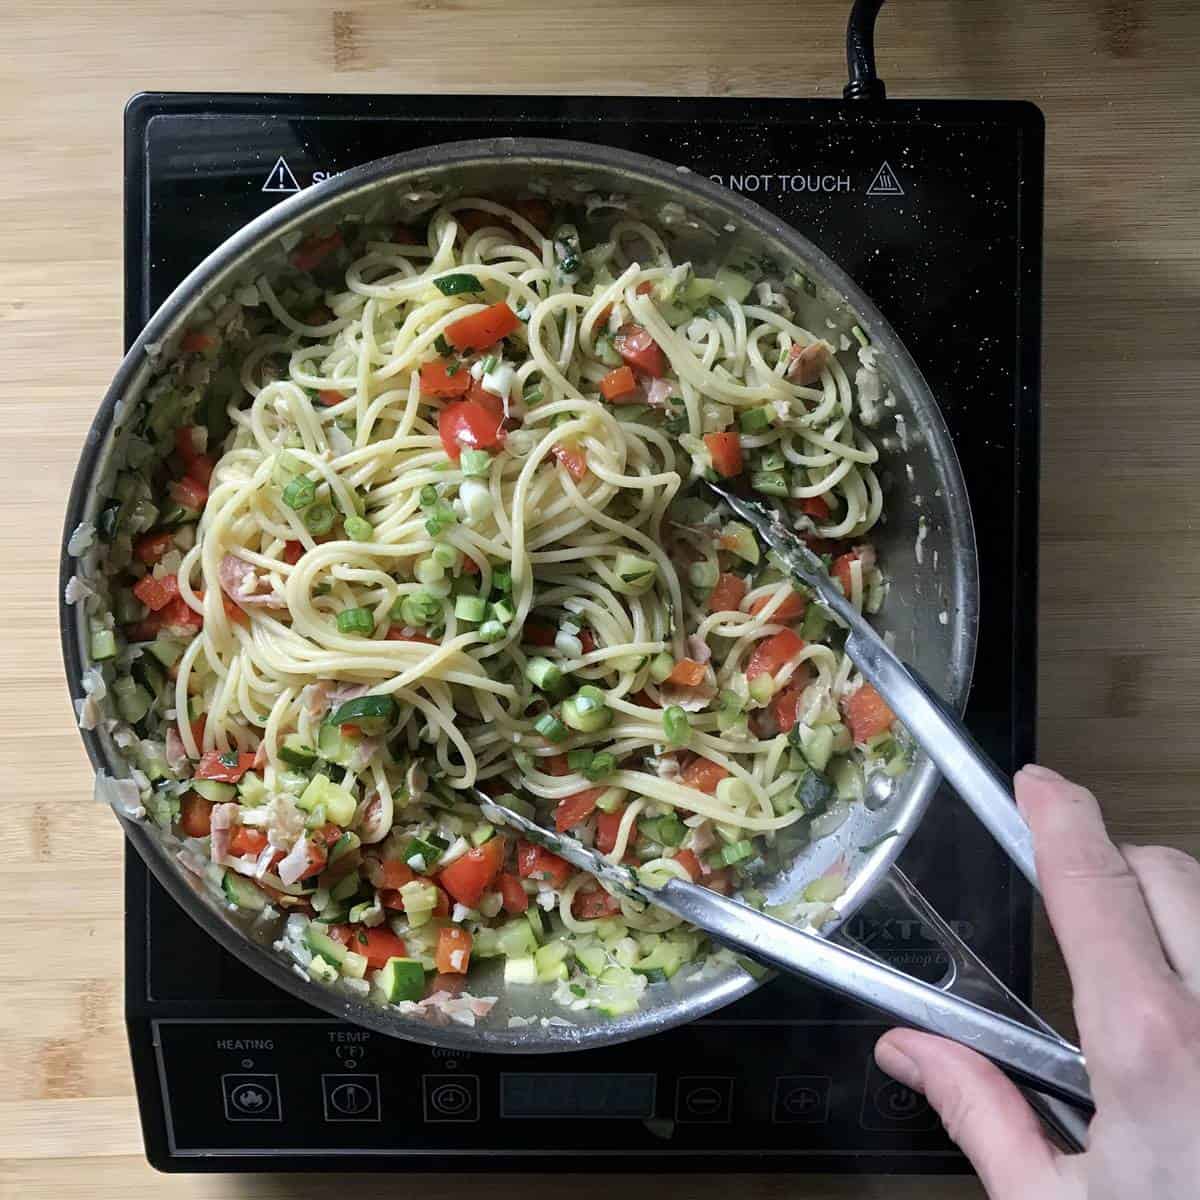 A spaghetti pasta recipe in a pan with sauteed vegetables.